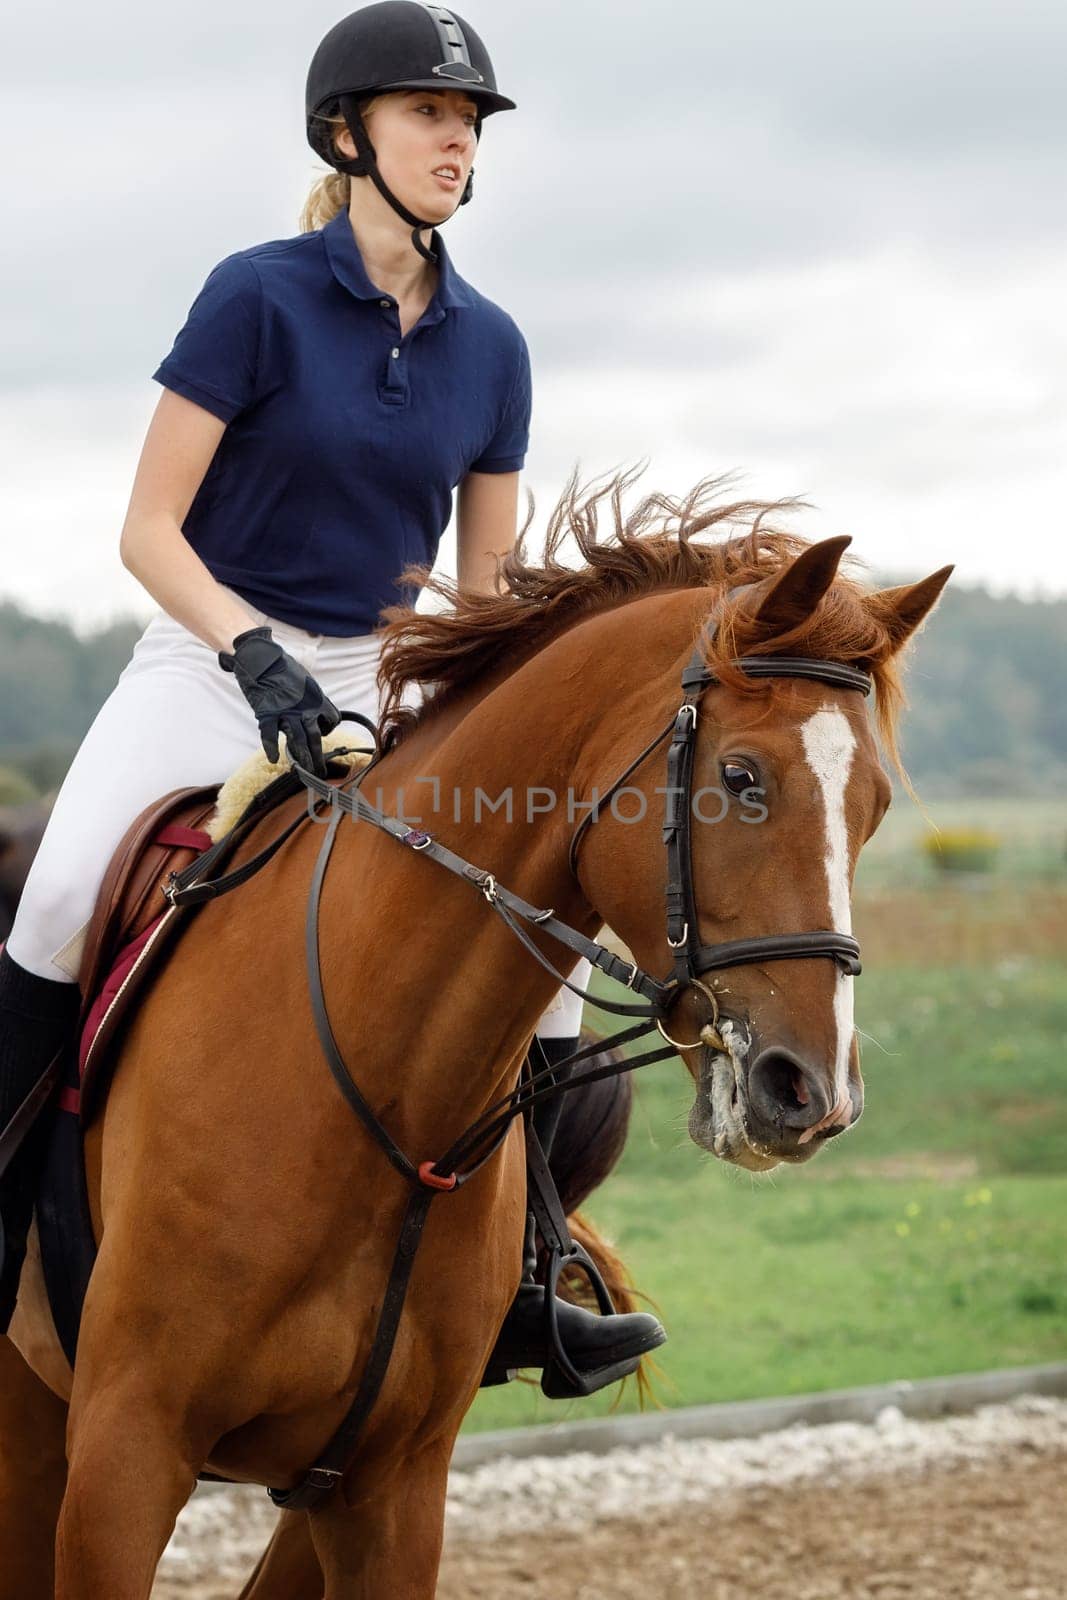 A young girl with a helmet rides a horse in a riding competition. Portrait up close at high riding speed and horse motion.